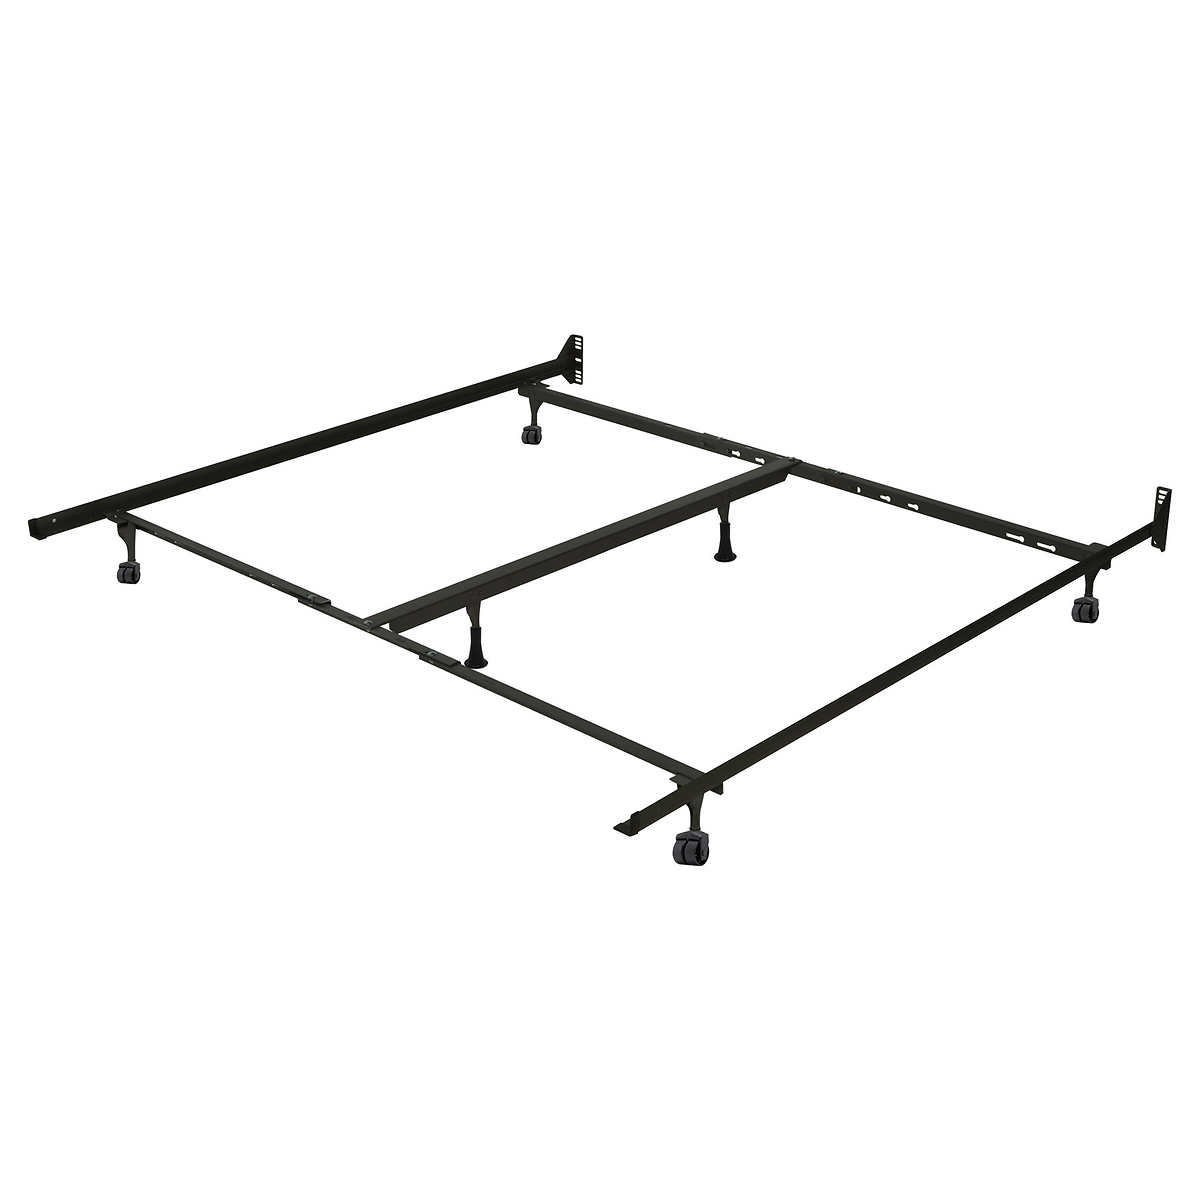 Universal Metal Bed Frame Costco, Costco King Bed Frame Canada